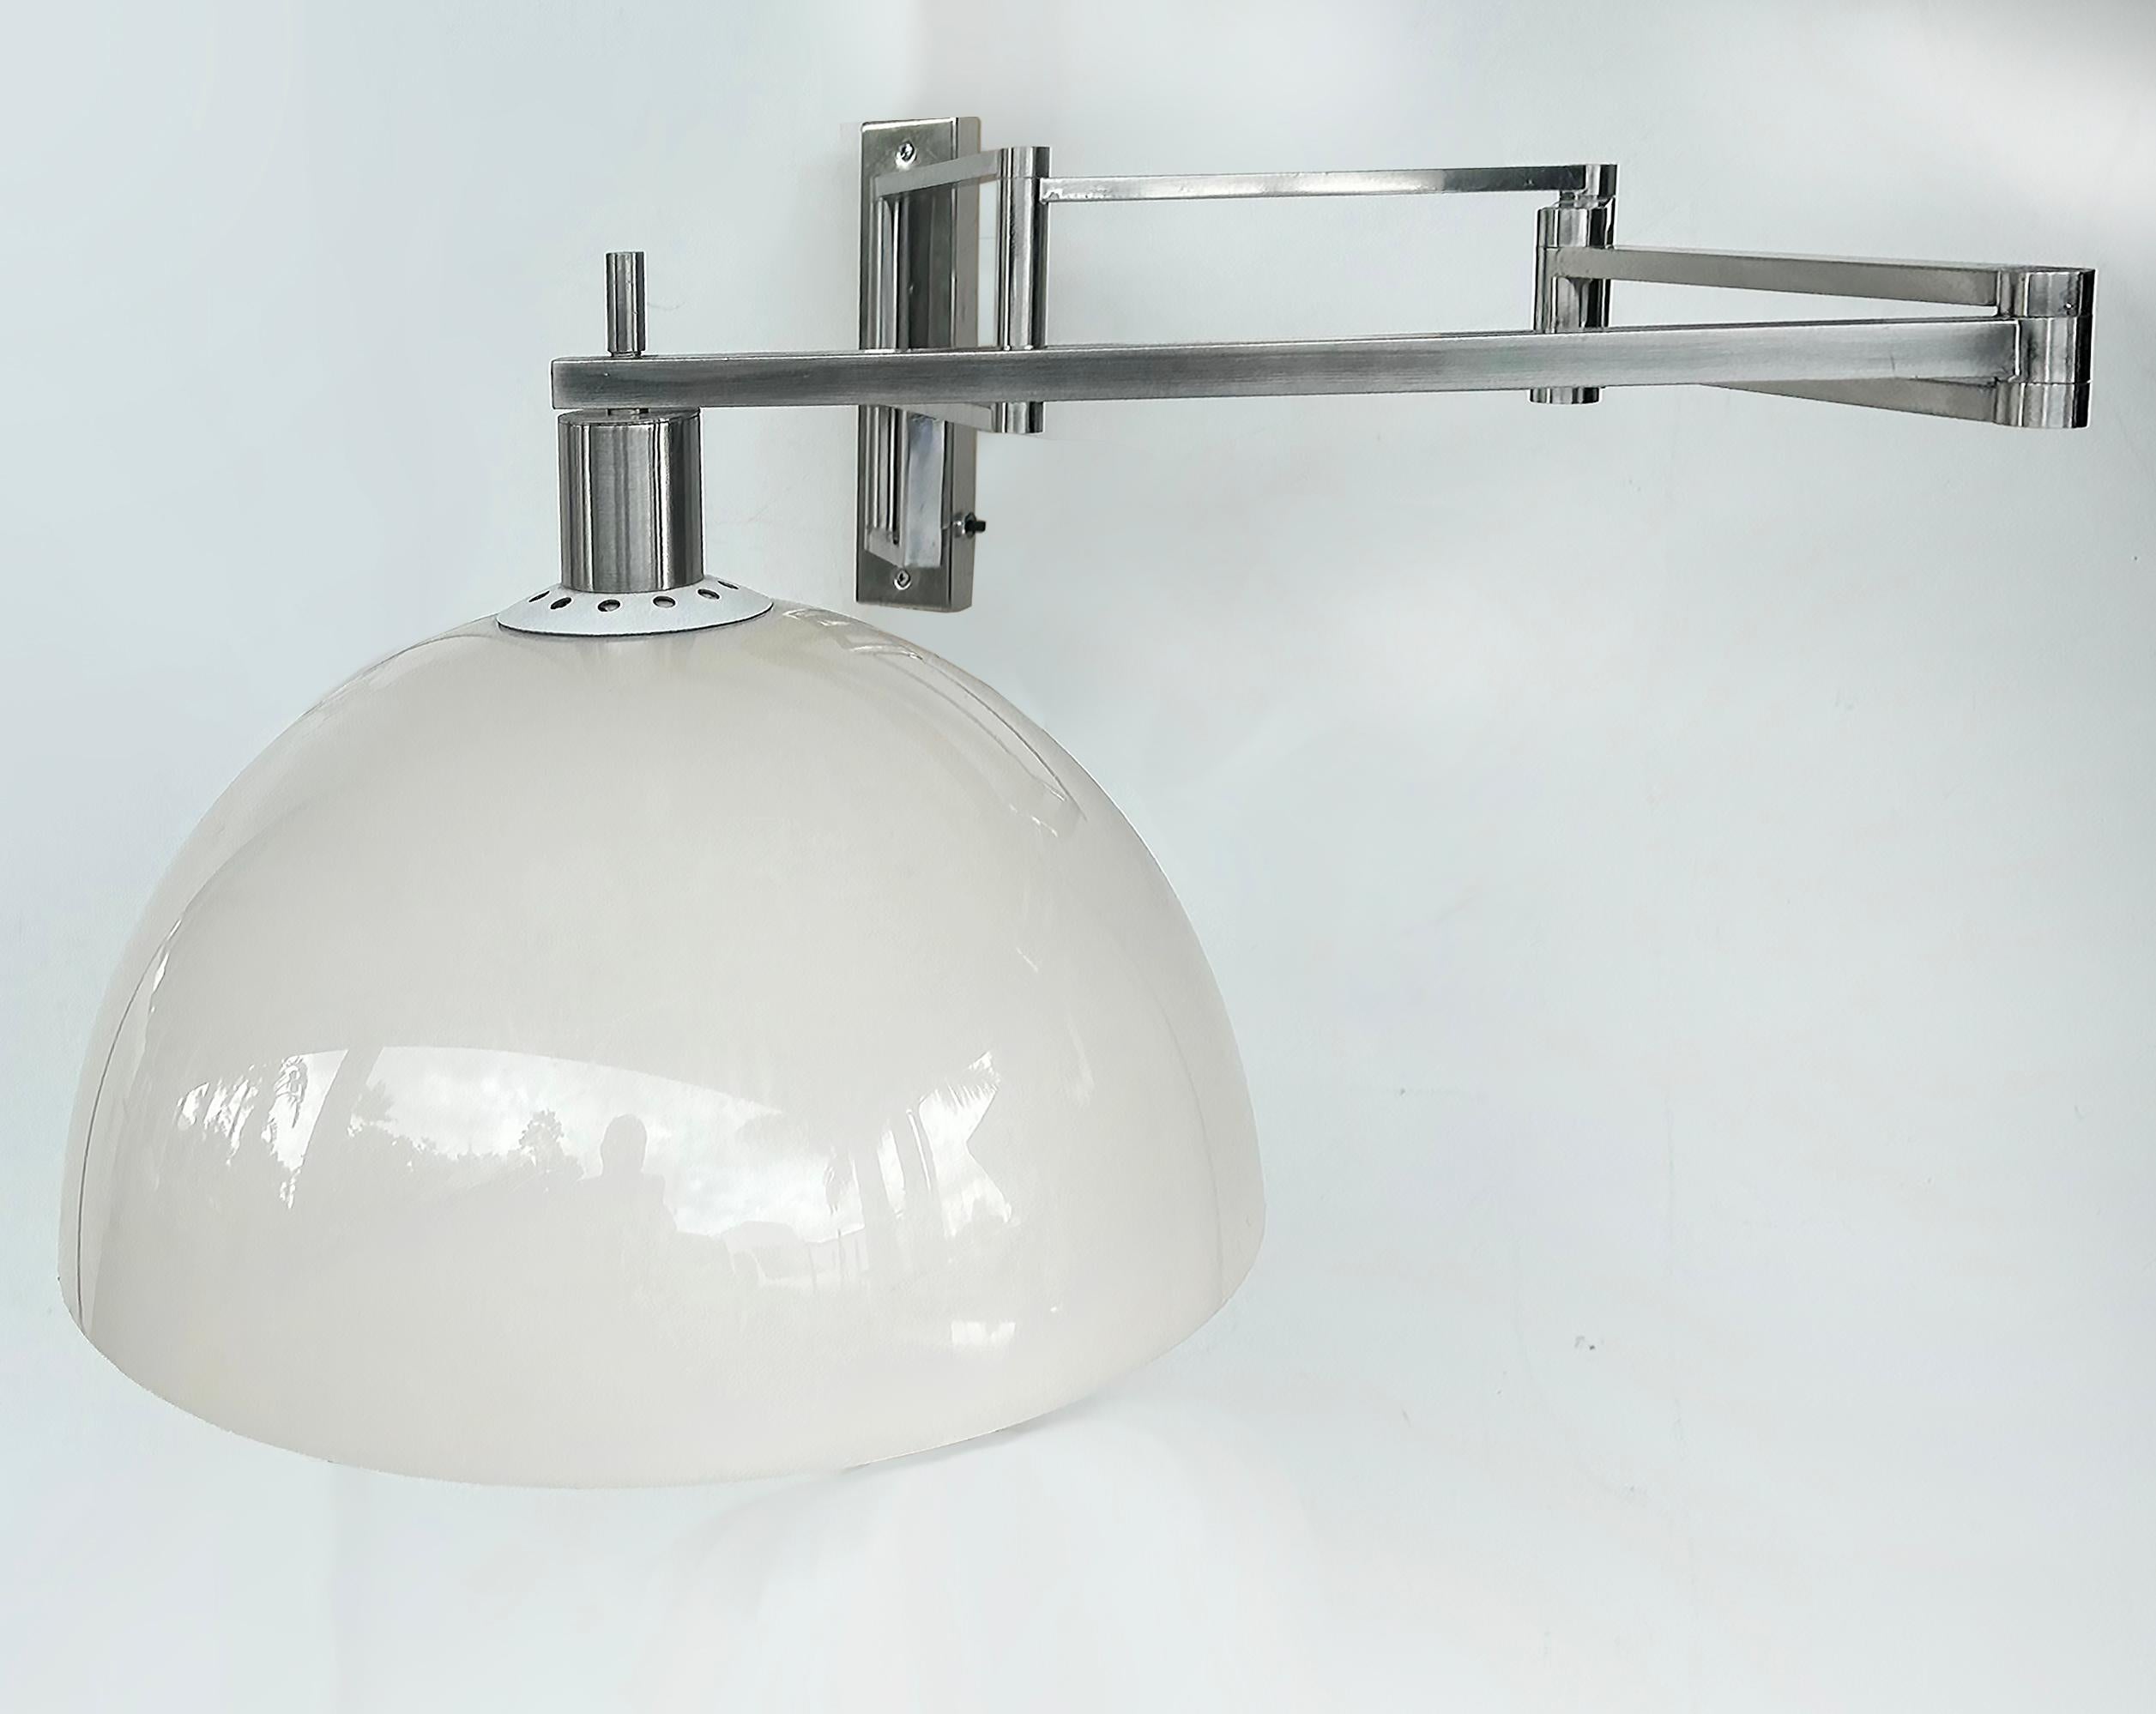 Vintage Goffredo Reggiani Adjustable Italian Wall Sconce in Chrome


Offered for sale is an adjustable and extendable wall lamp in chrome designed and produced by Goffredo Reggiani in Italy 1970s. The fixture is in very good vintage condition with